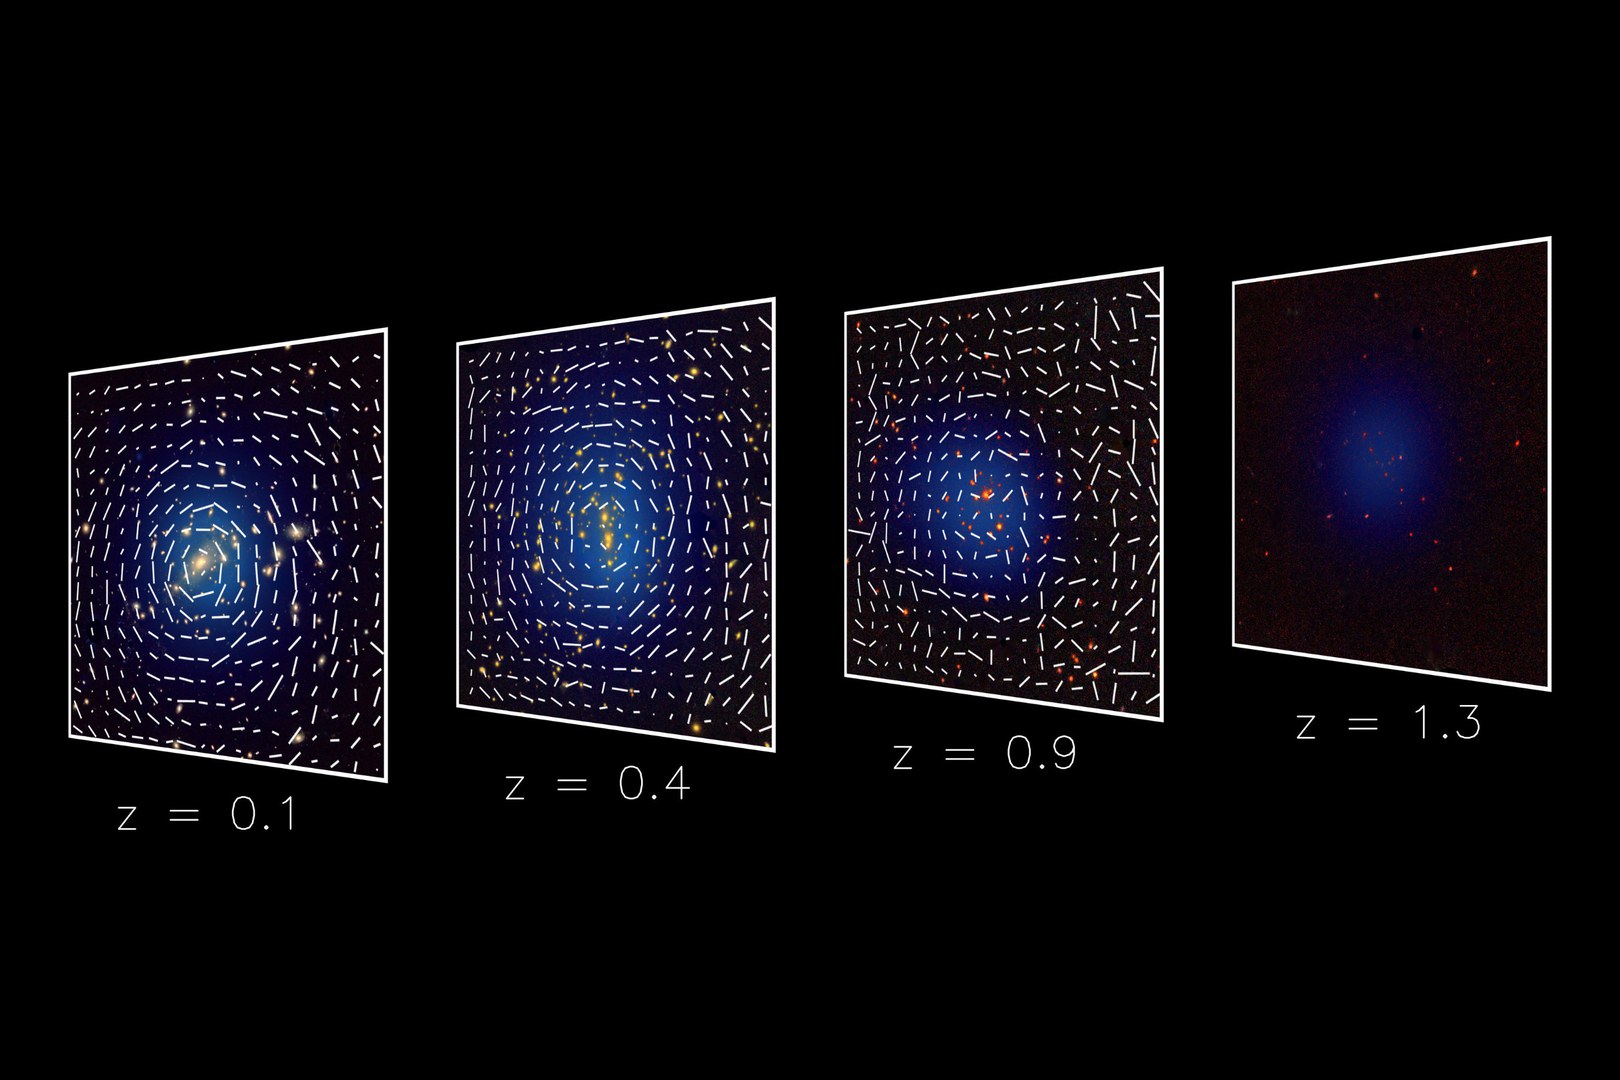 Same as the other two images but additionally illustrating the measured average distortion of the images of background galaxies caused by the weak gravitational lensing effect that enables the “weighing” of the clusters.